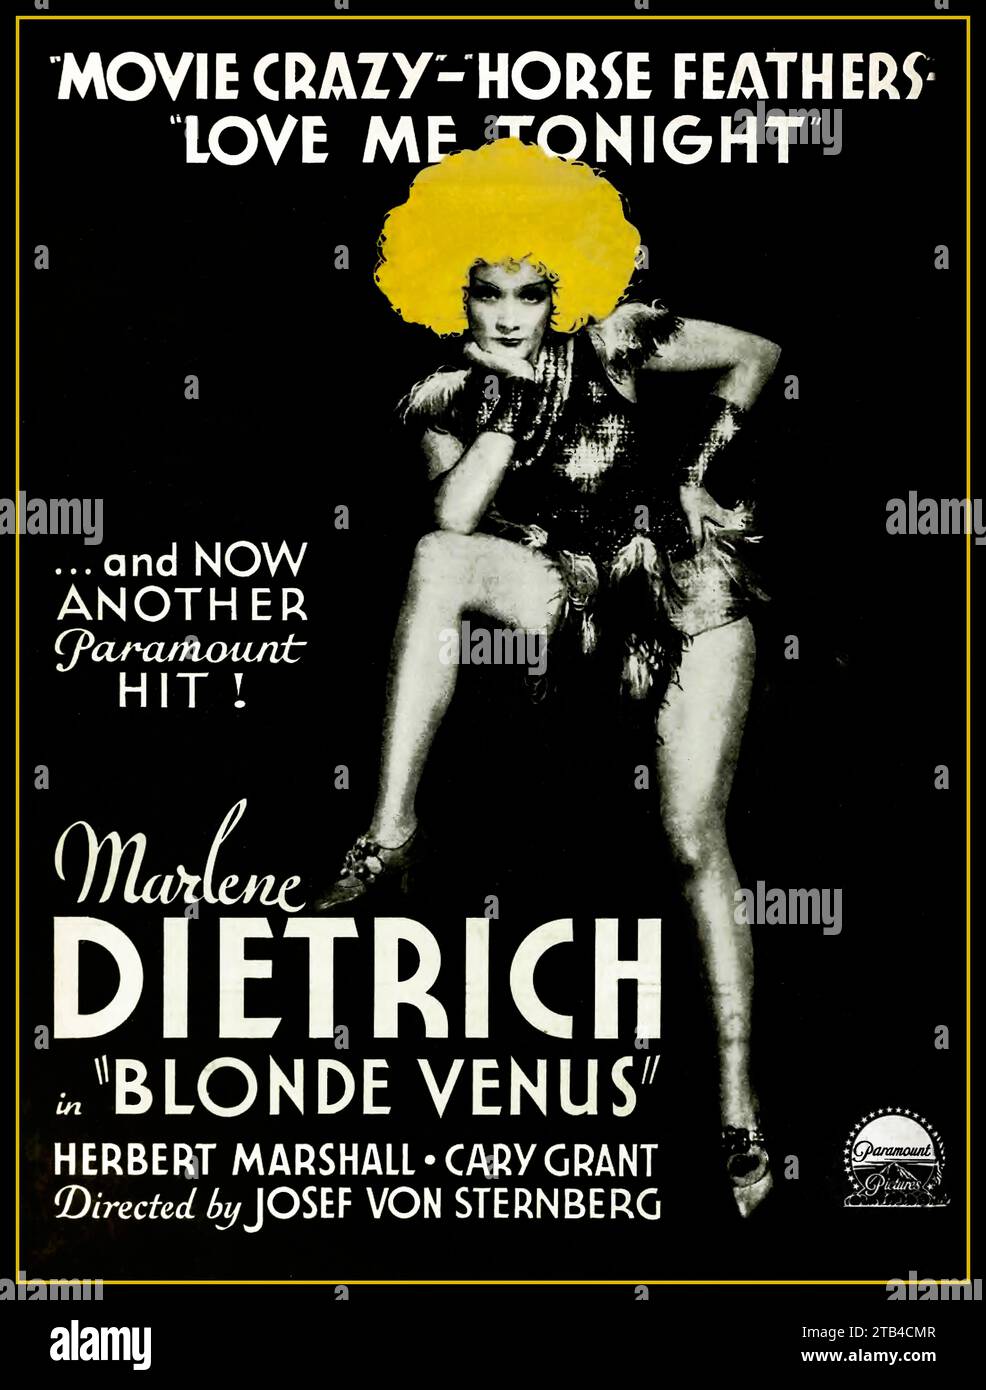 'Blonde Venus'  MARLENE DIETRICH Vintage movei poster 1932 American pre-Code drama film starring Marlene Dietrich, Herbert Marshall and Cary Grant. It was produced, edited and directed by Josef von Sternberg from a screenplay by Jules Furthman and S. K. Lauren, adapted from a story by Furthman and von Sternberg. The original story 'Mother Love' was written by Dietrich herself. The musical score was by W. Franke Harling, John Leipold, Paul Marquardt and Oscar Potoker, with cinematography by Bert Glennon. Stock Photo